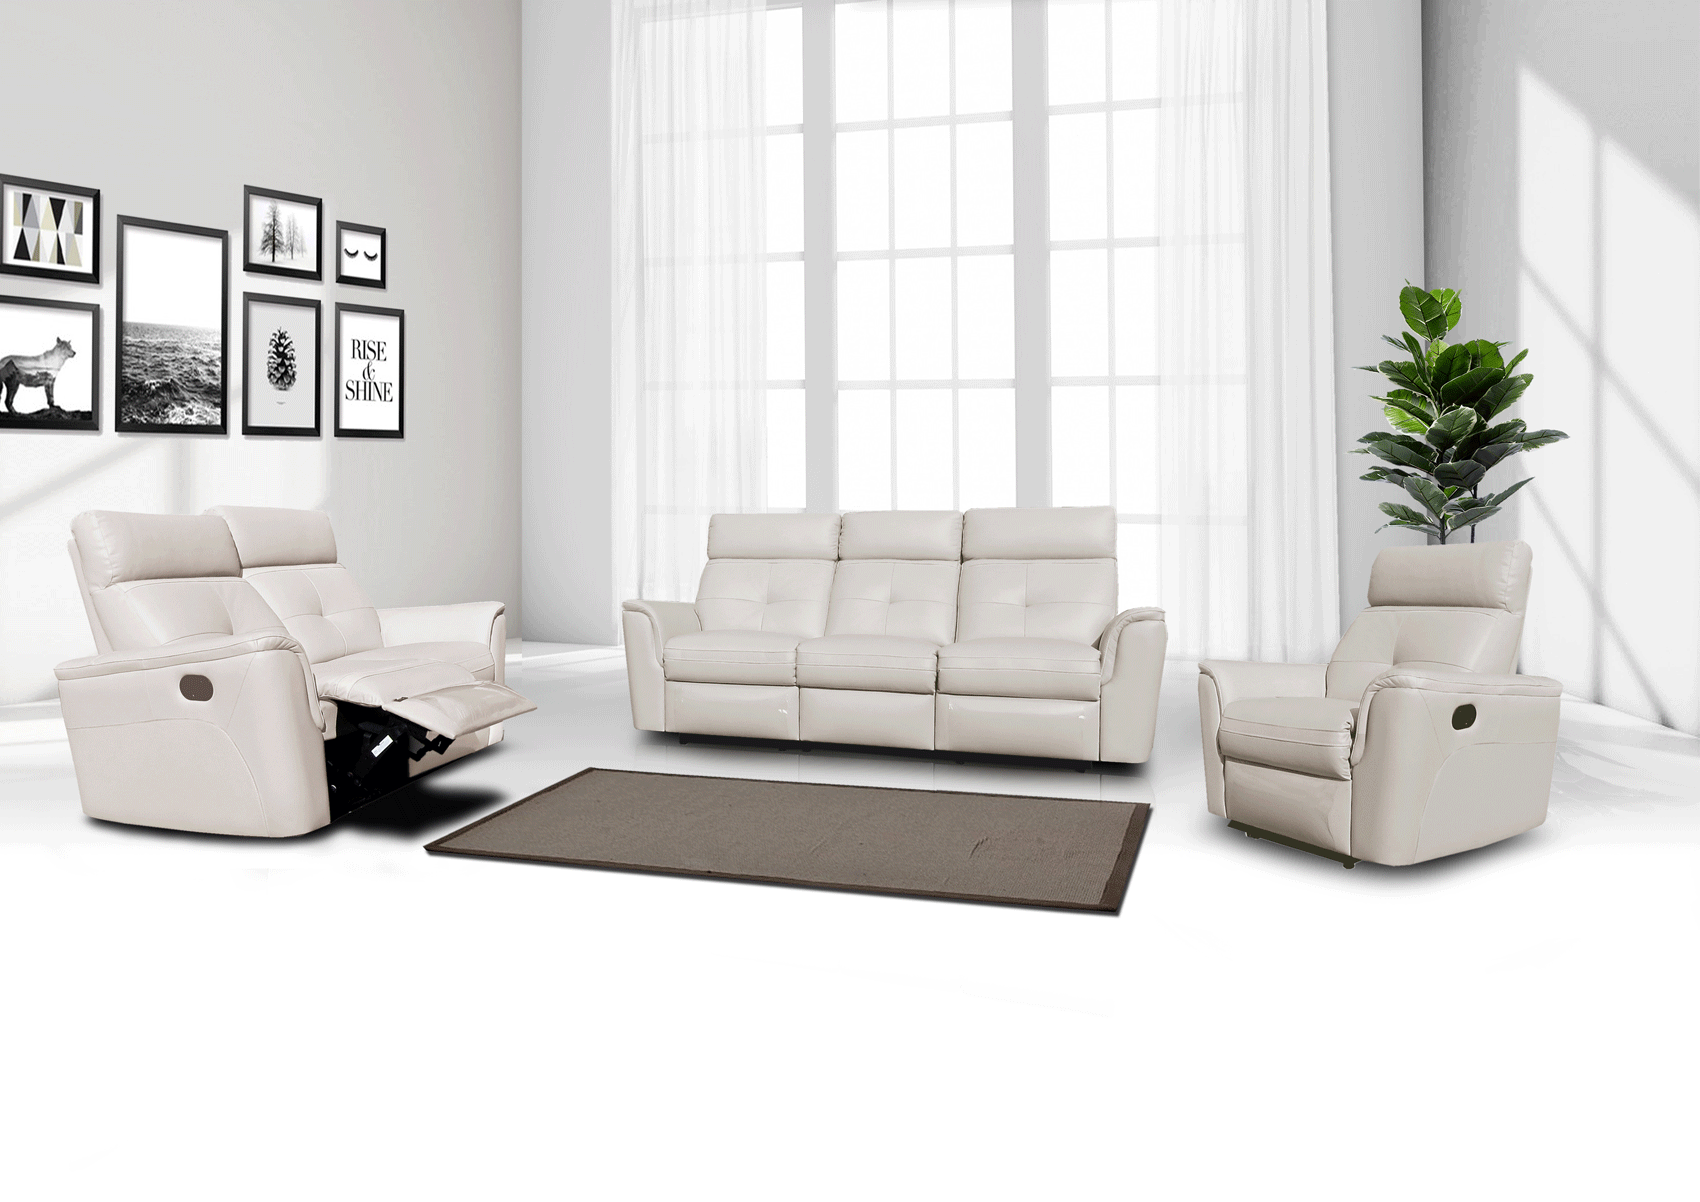 Living Room Furniture Reclining and Sliding Seats Sets 8501 White w/Manual Recliners